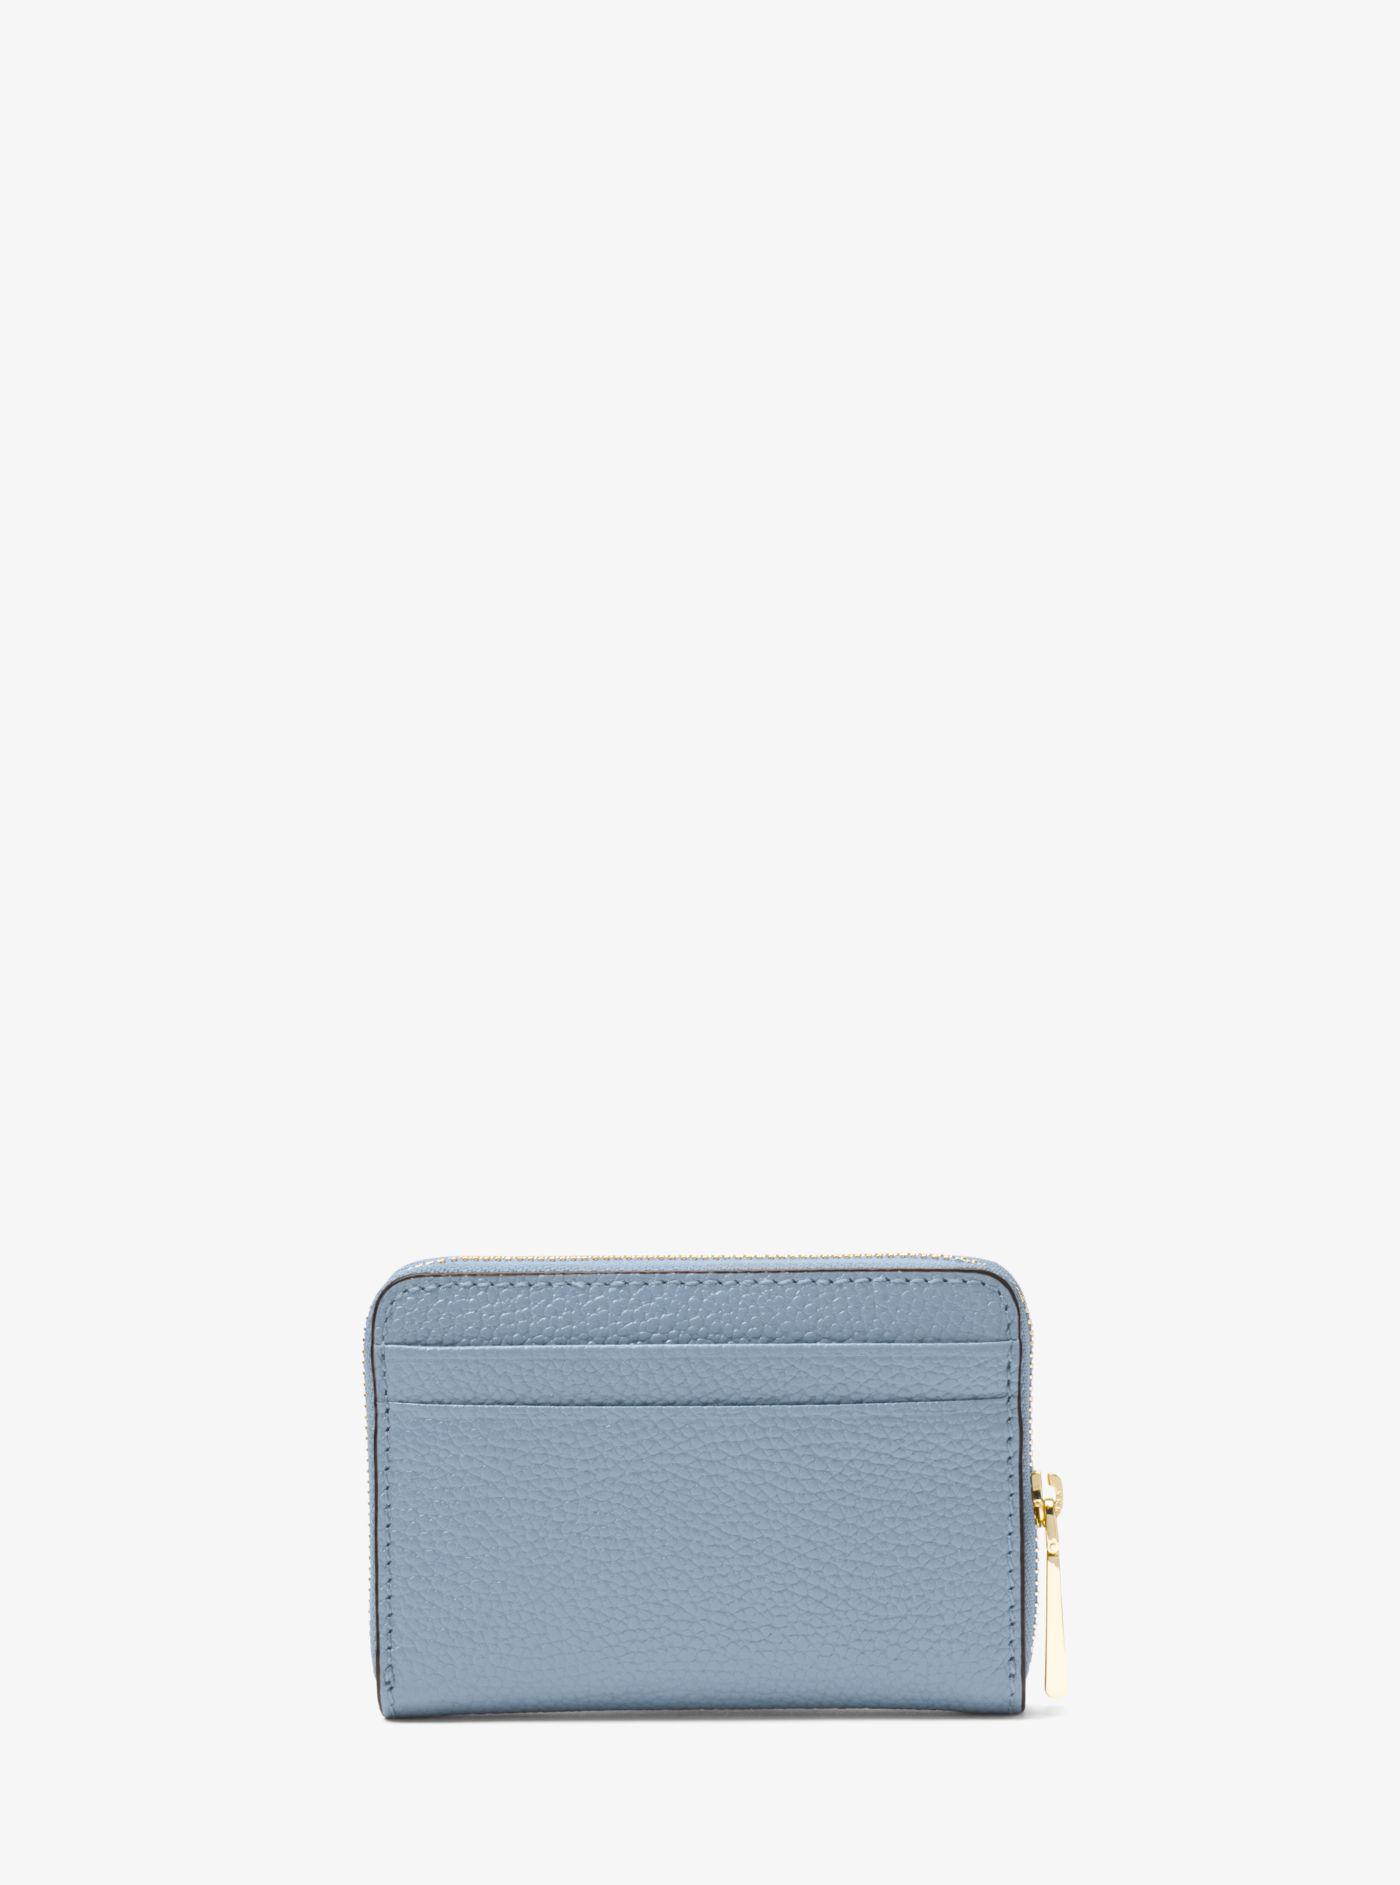 Michael Kors Small Pebbled Leather Wallet Pale Blue (Blue) - Lyst